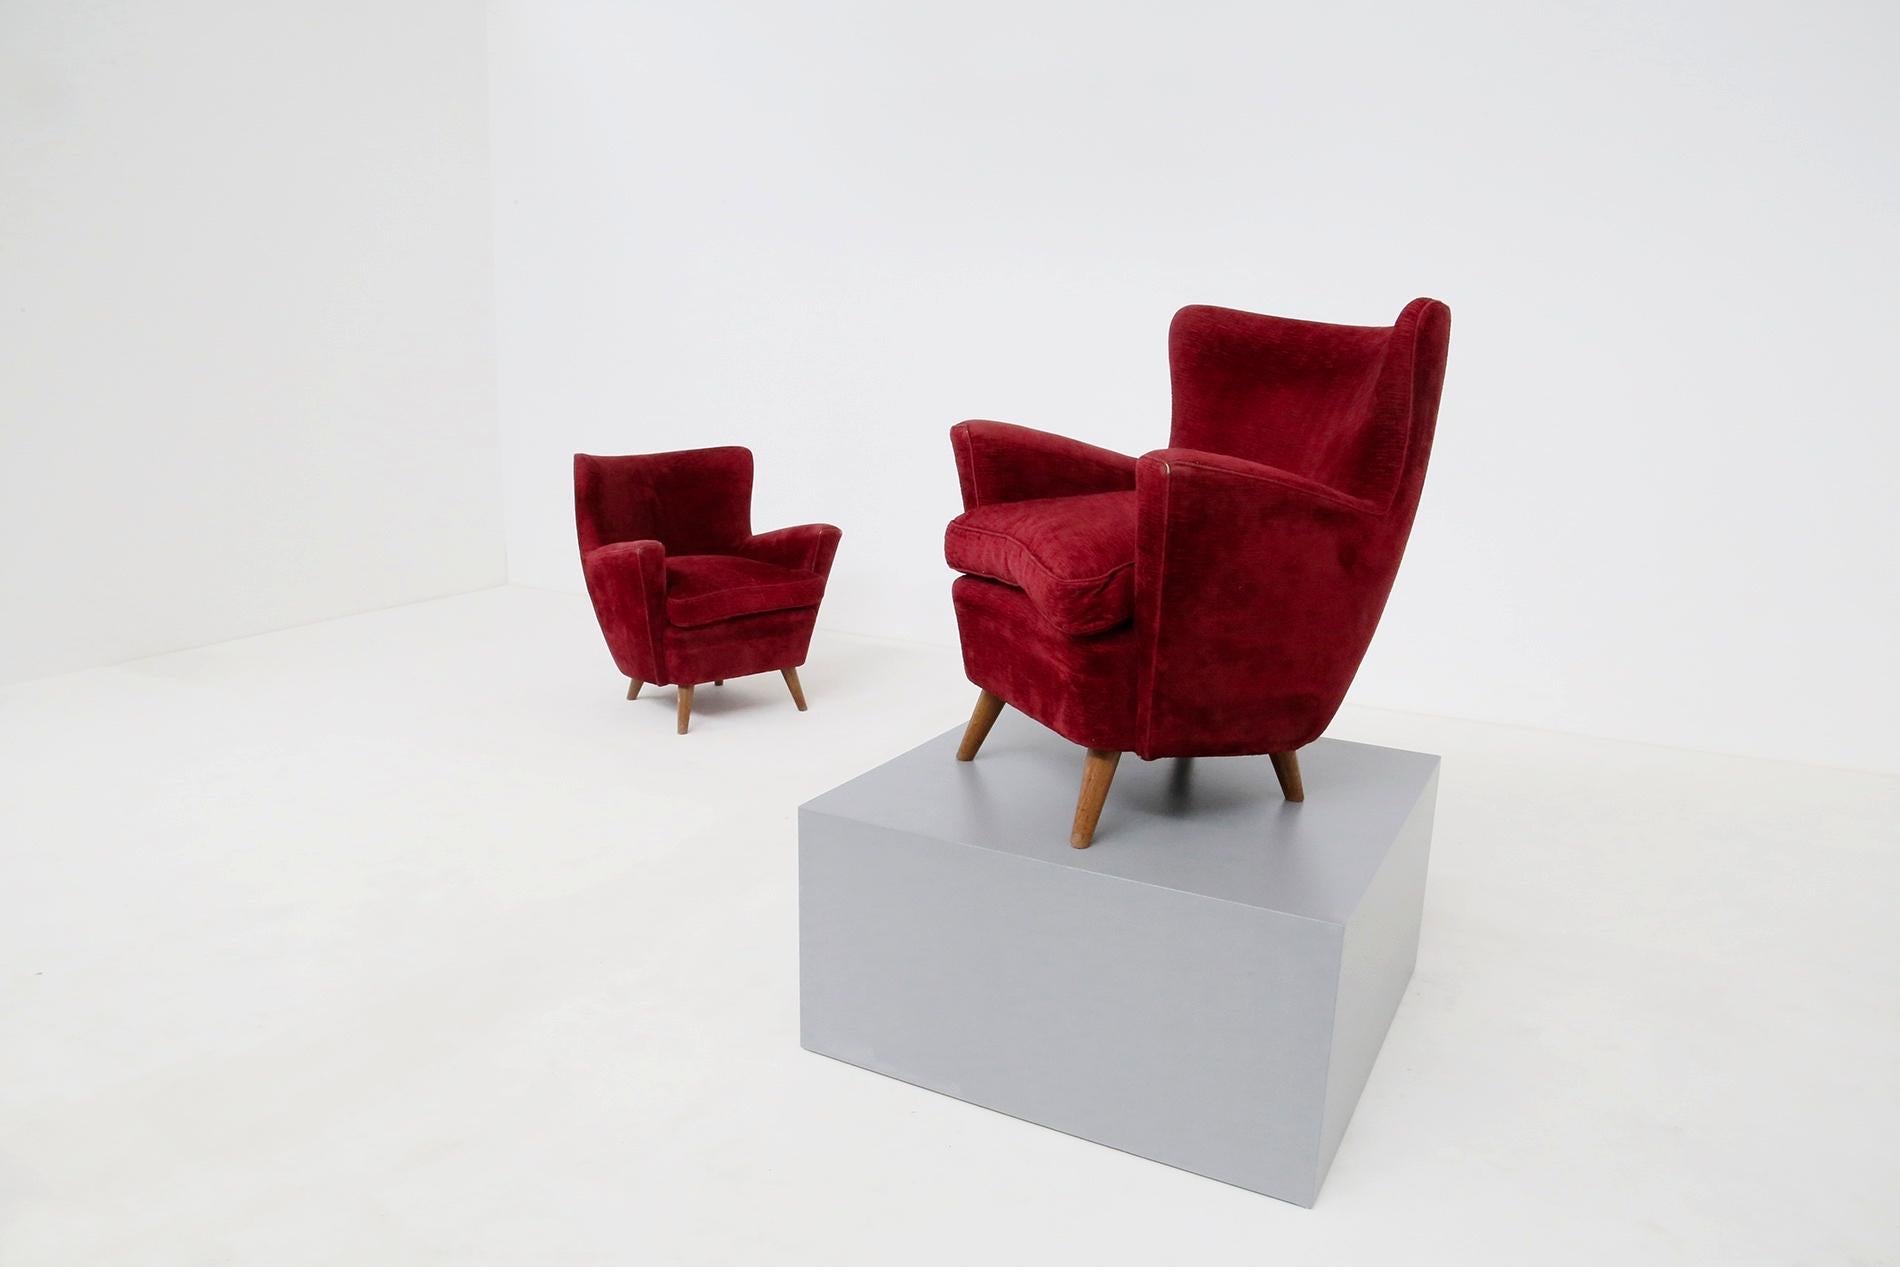 Mid-20th Century Pair of Italian Armchairs Attributed to Melchiorre Bega in Bordeaux Velvet, 1950